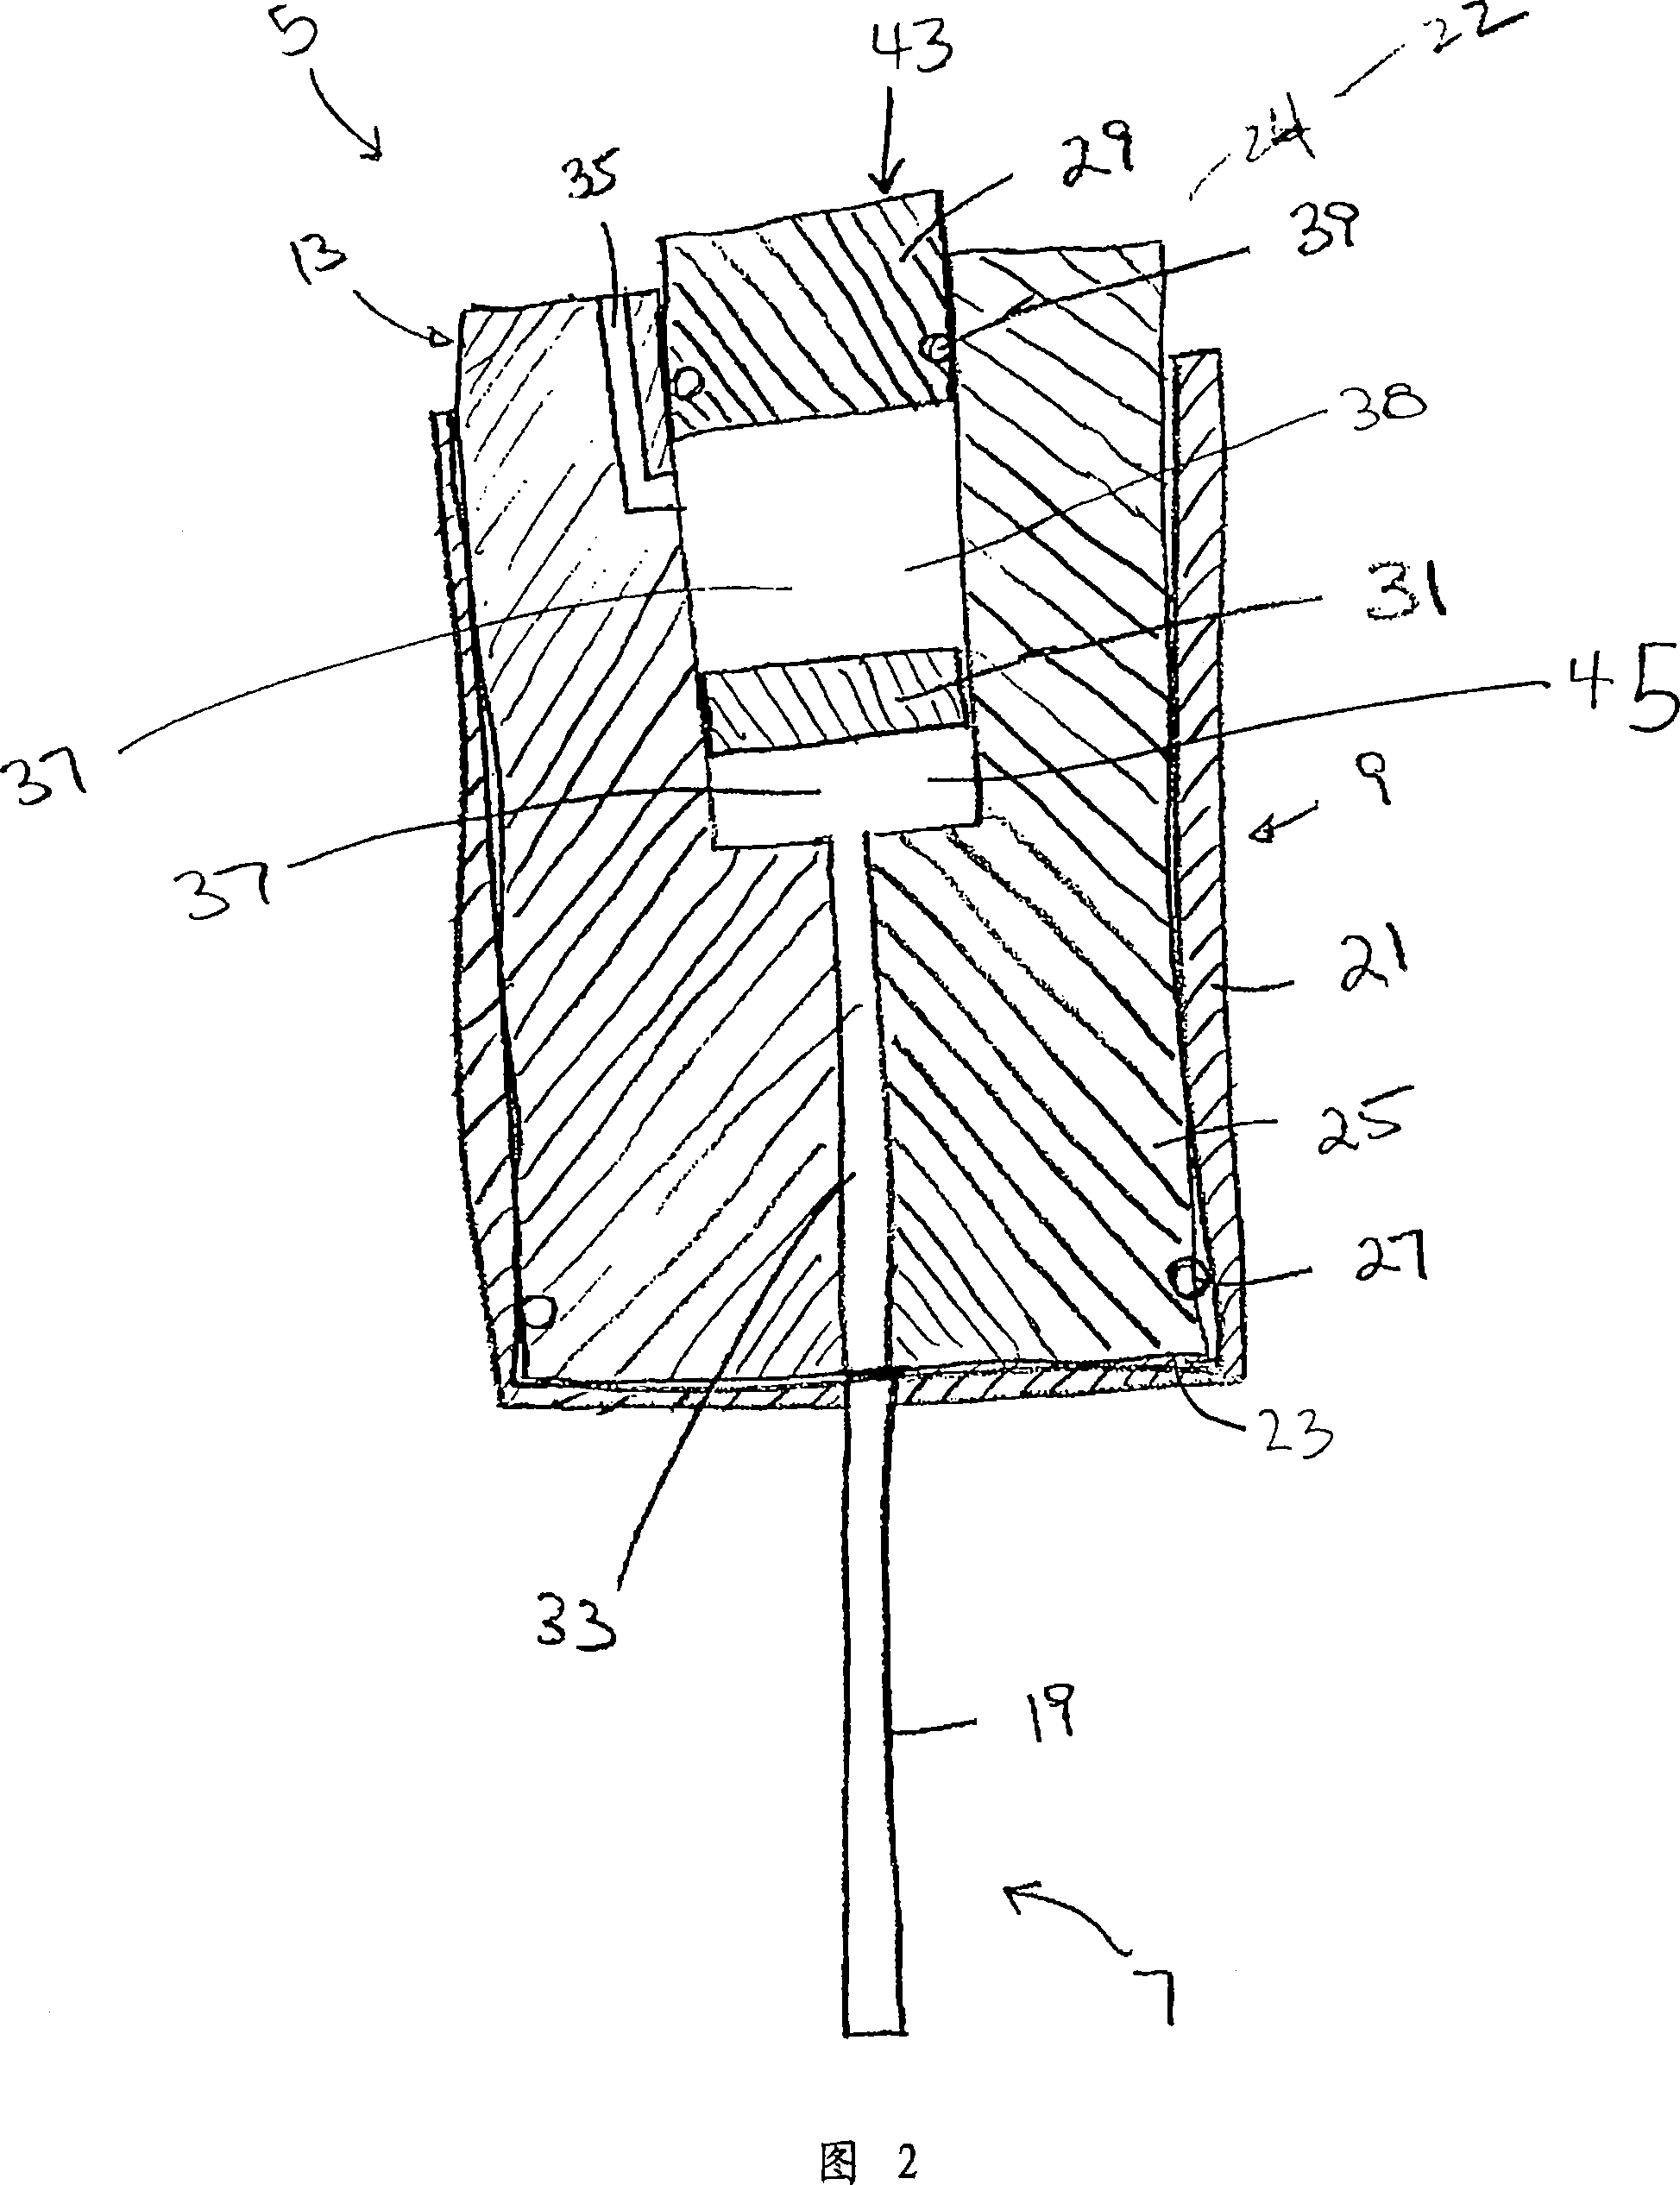 Automated fluid handling cartridge, fluid processing system, and methods